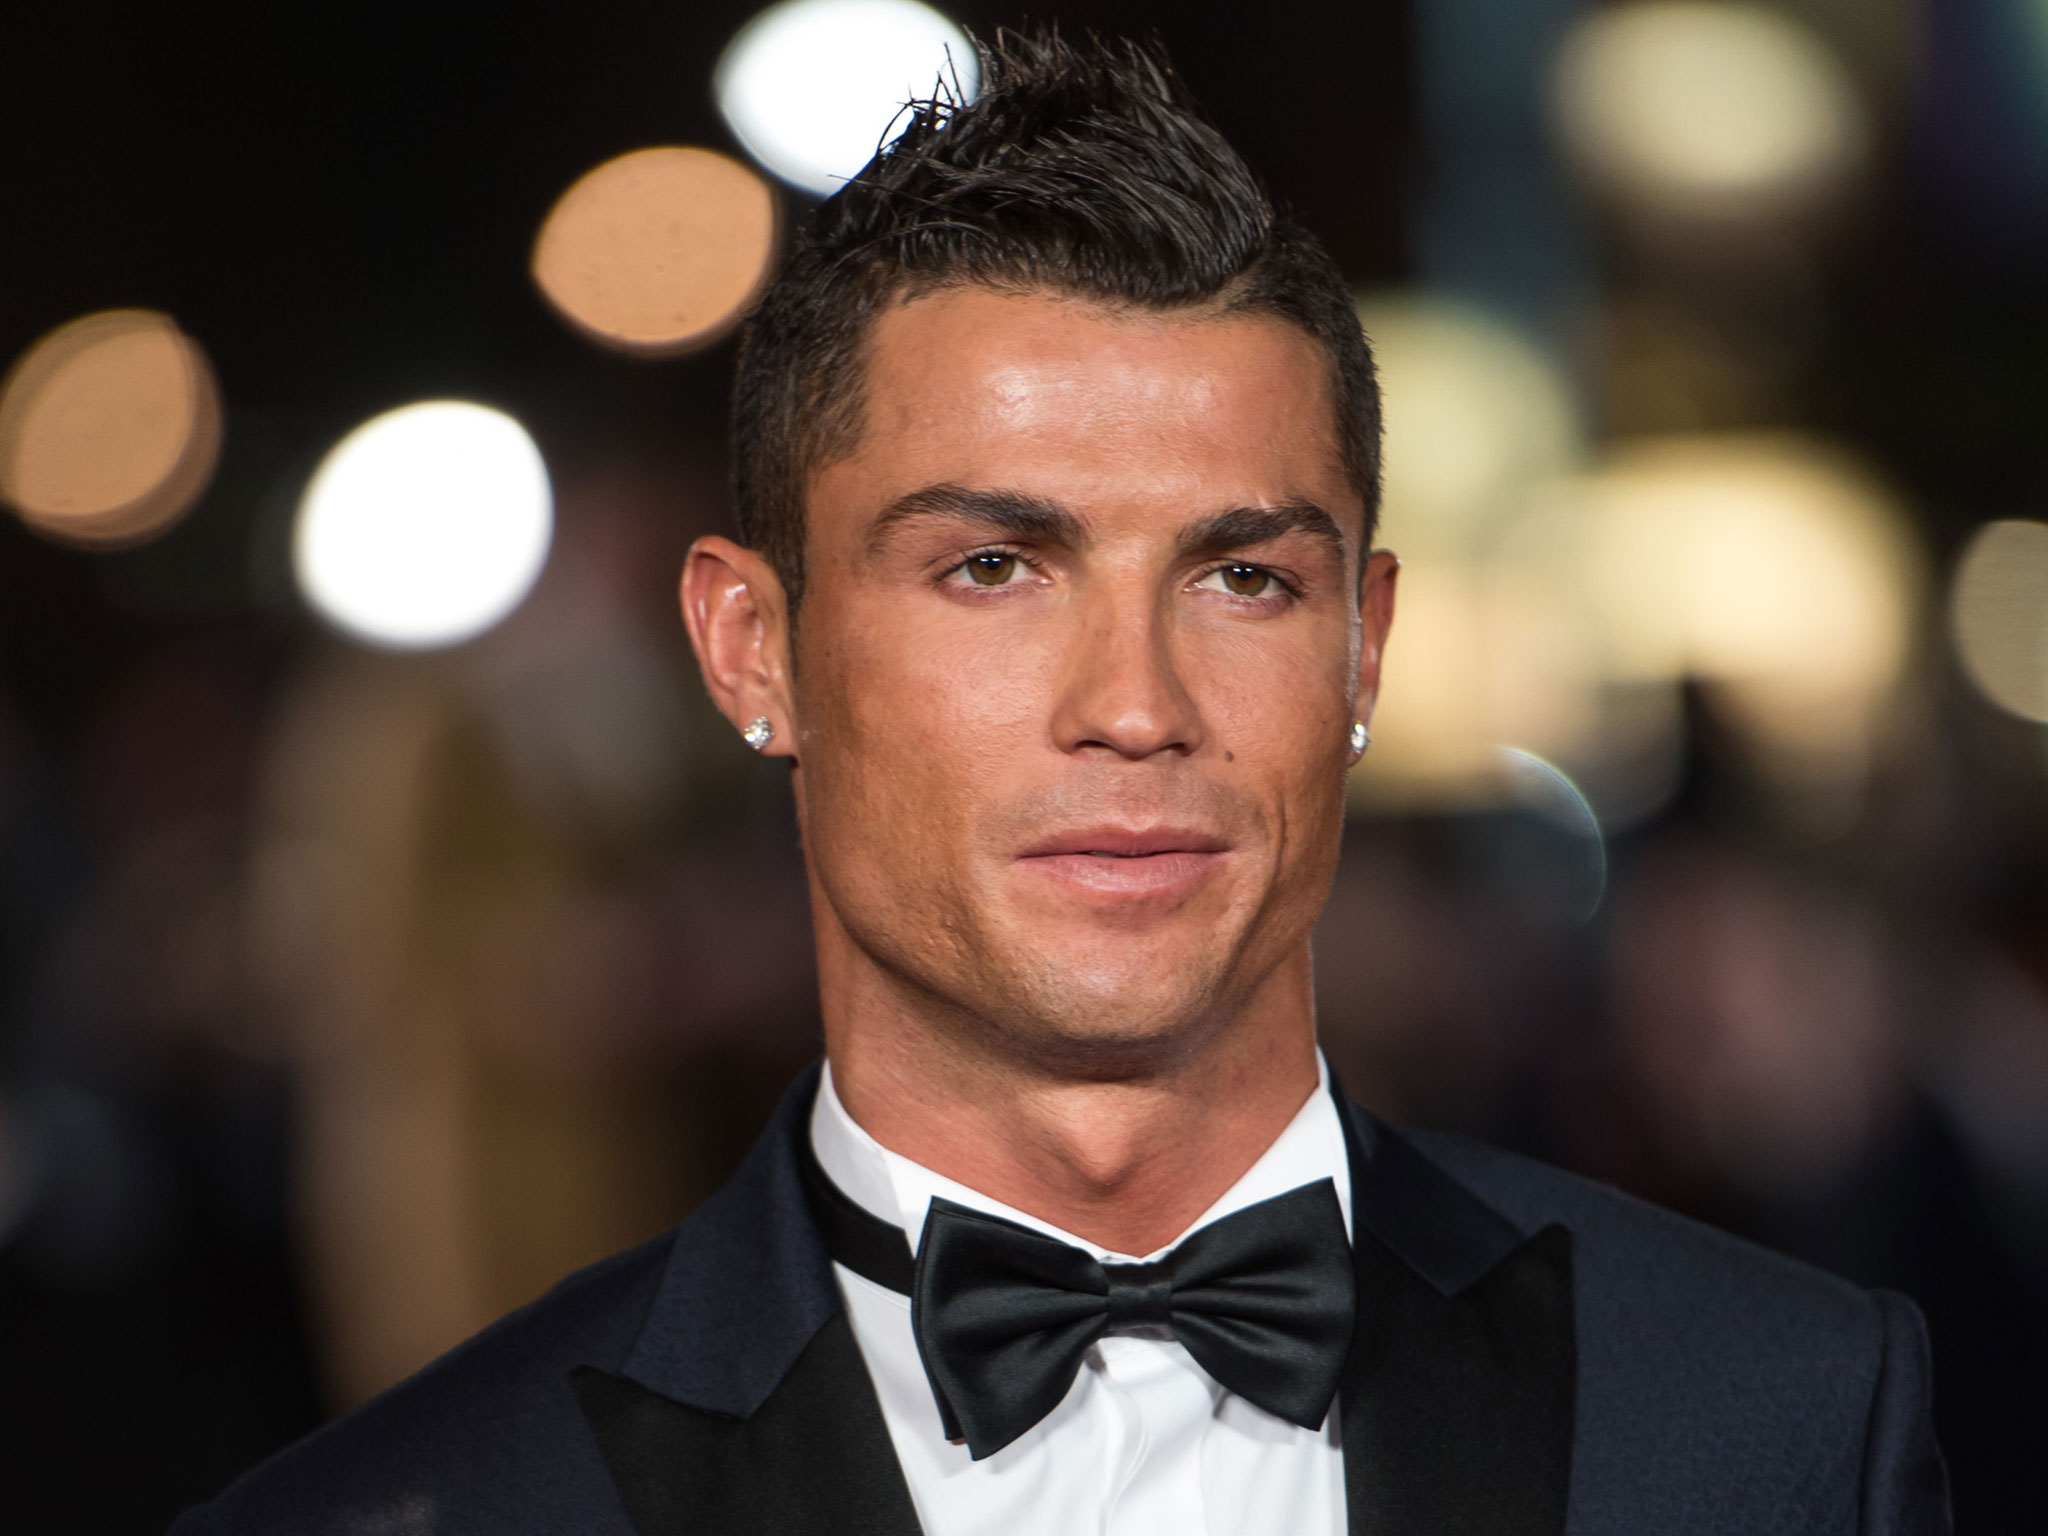 11 Awesome Pictures Of Cristiano Ronaldo - Awesome 11